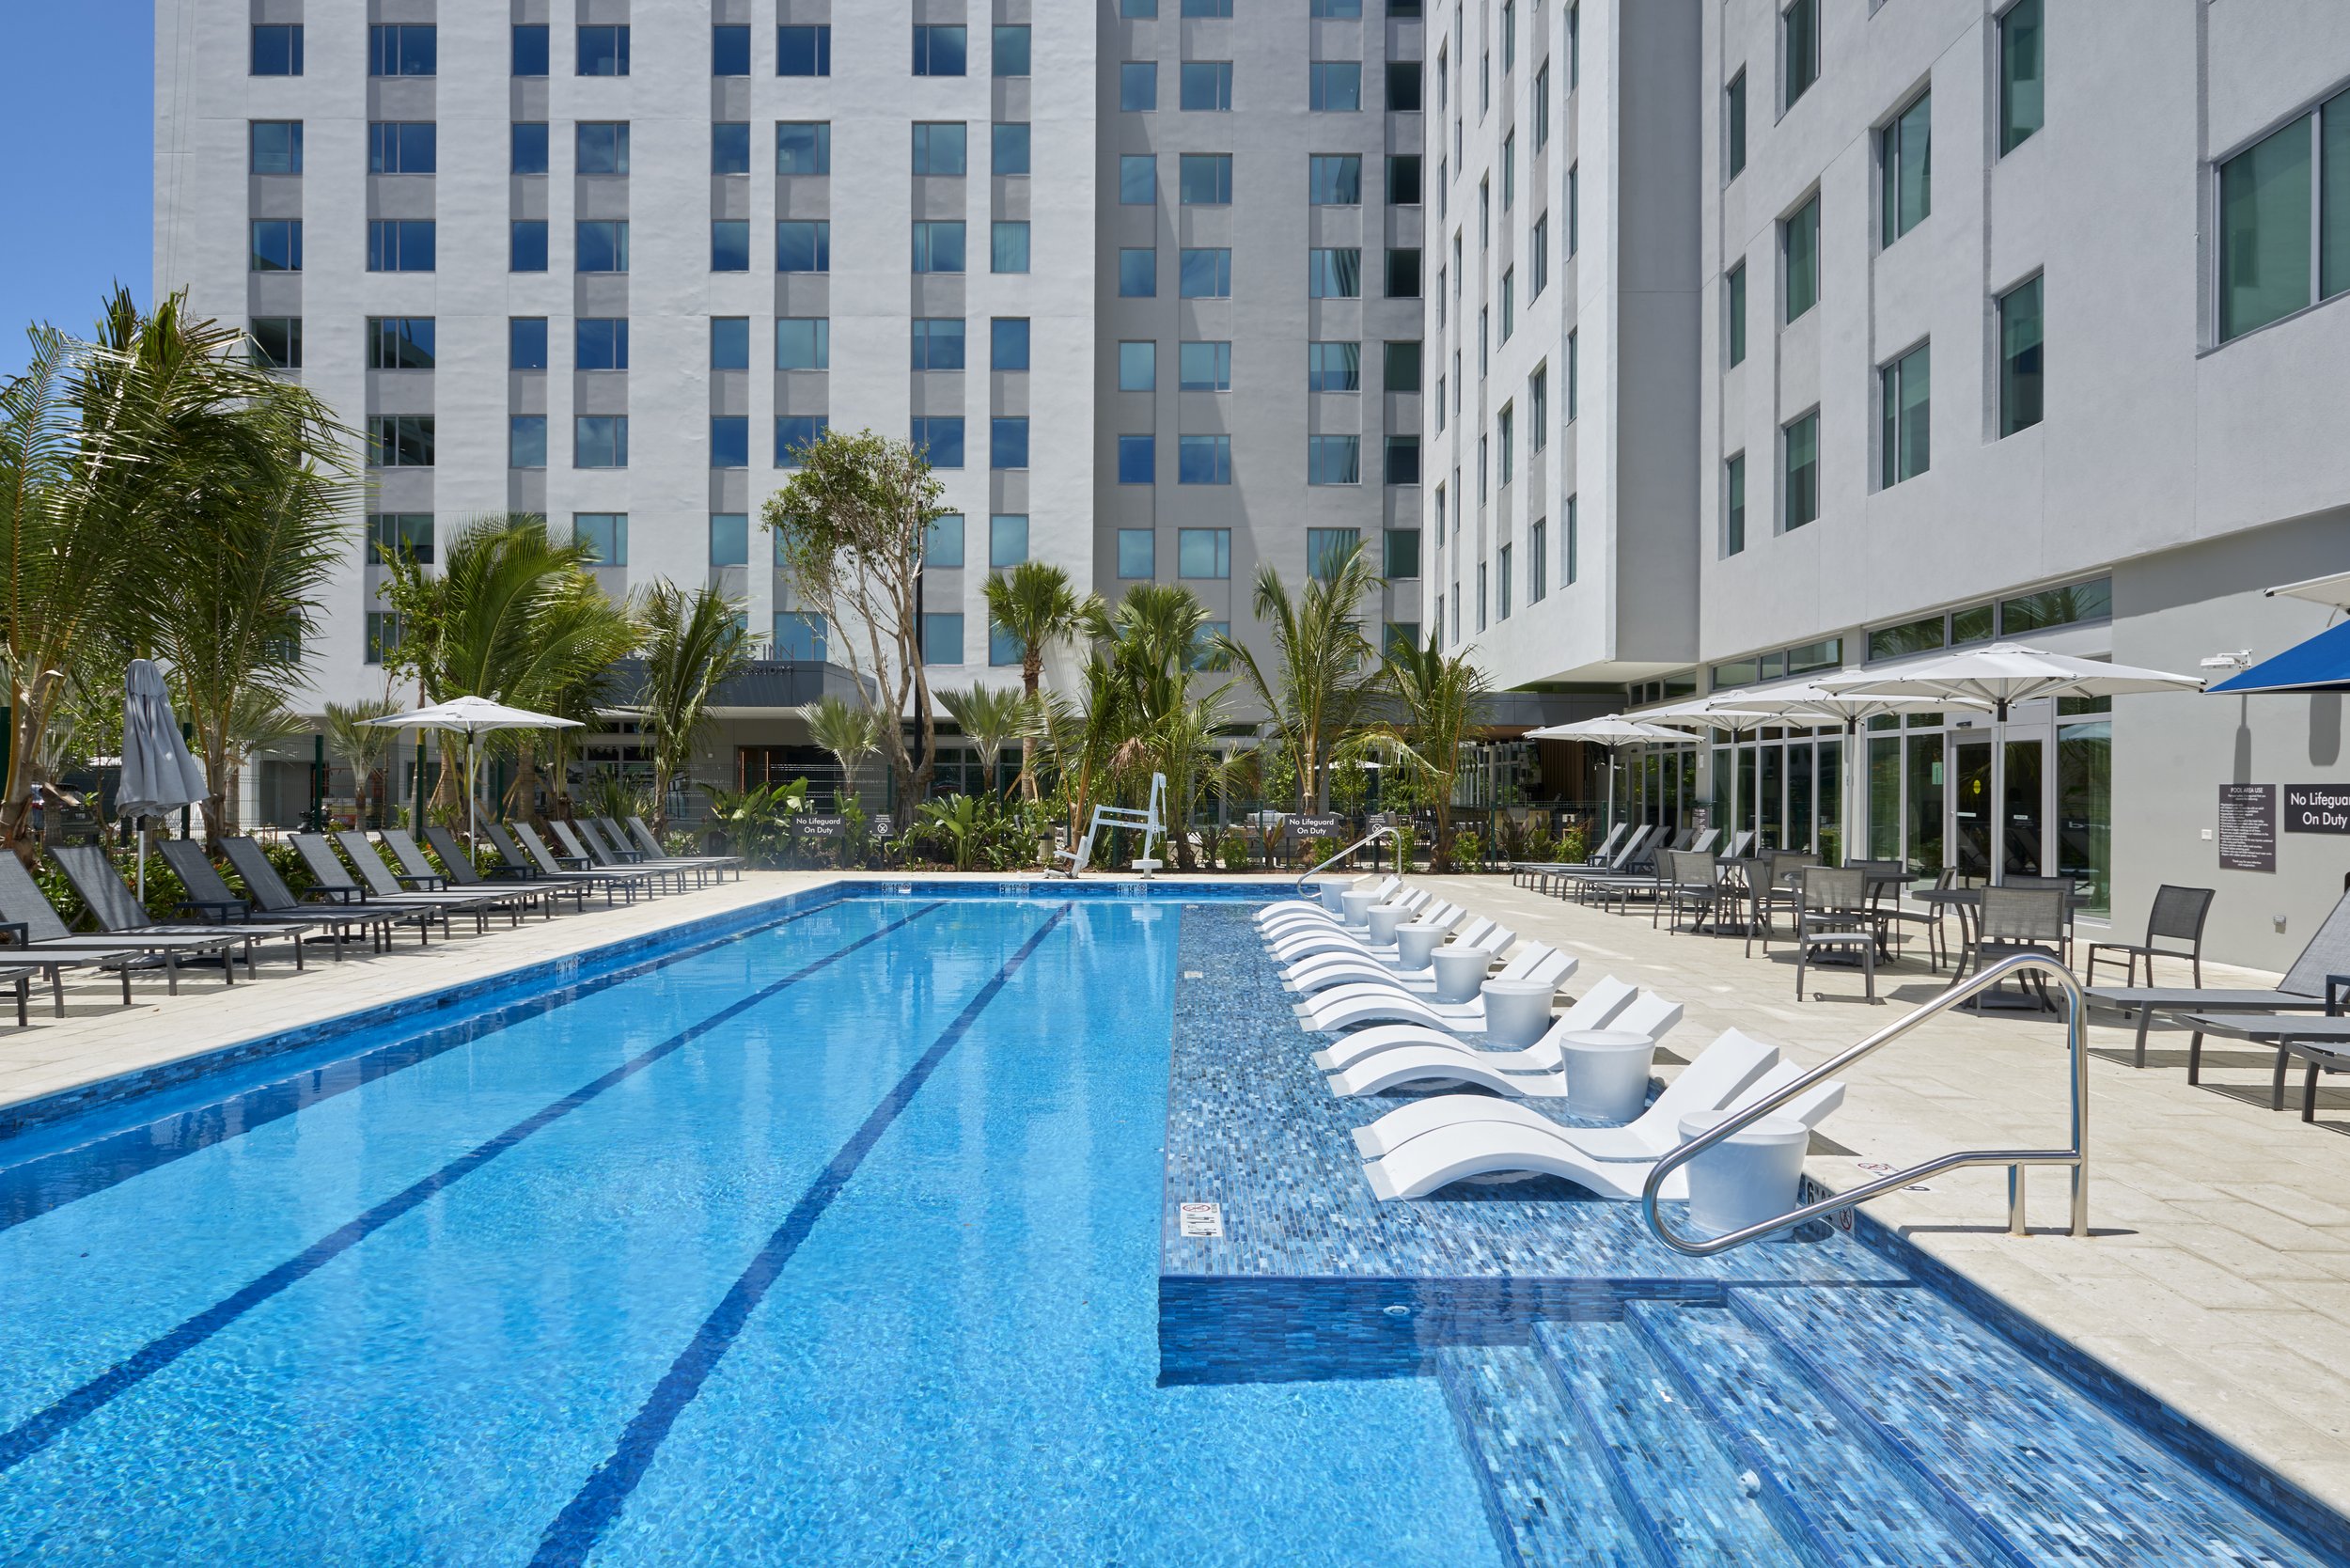  Outdoor pool area of the Residence Inn by Marriott hospitality project. 